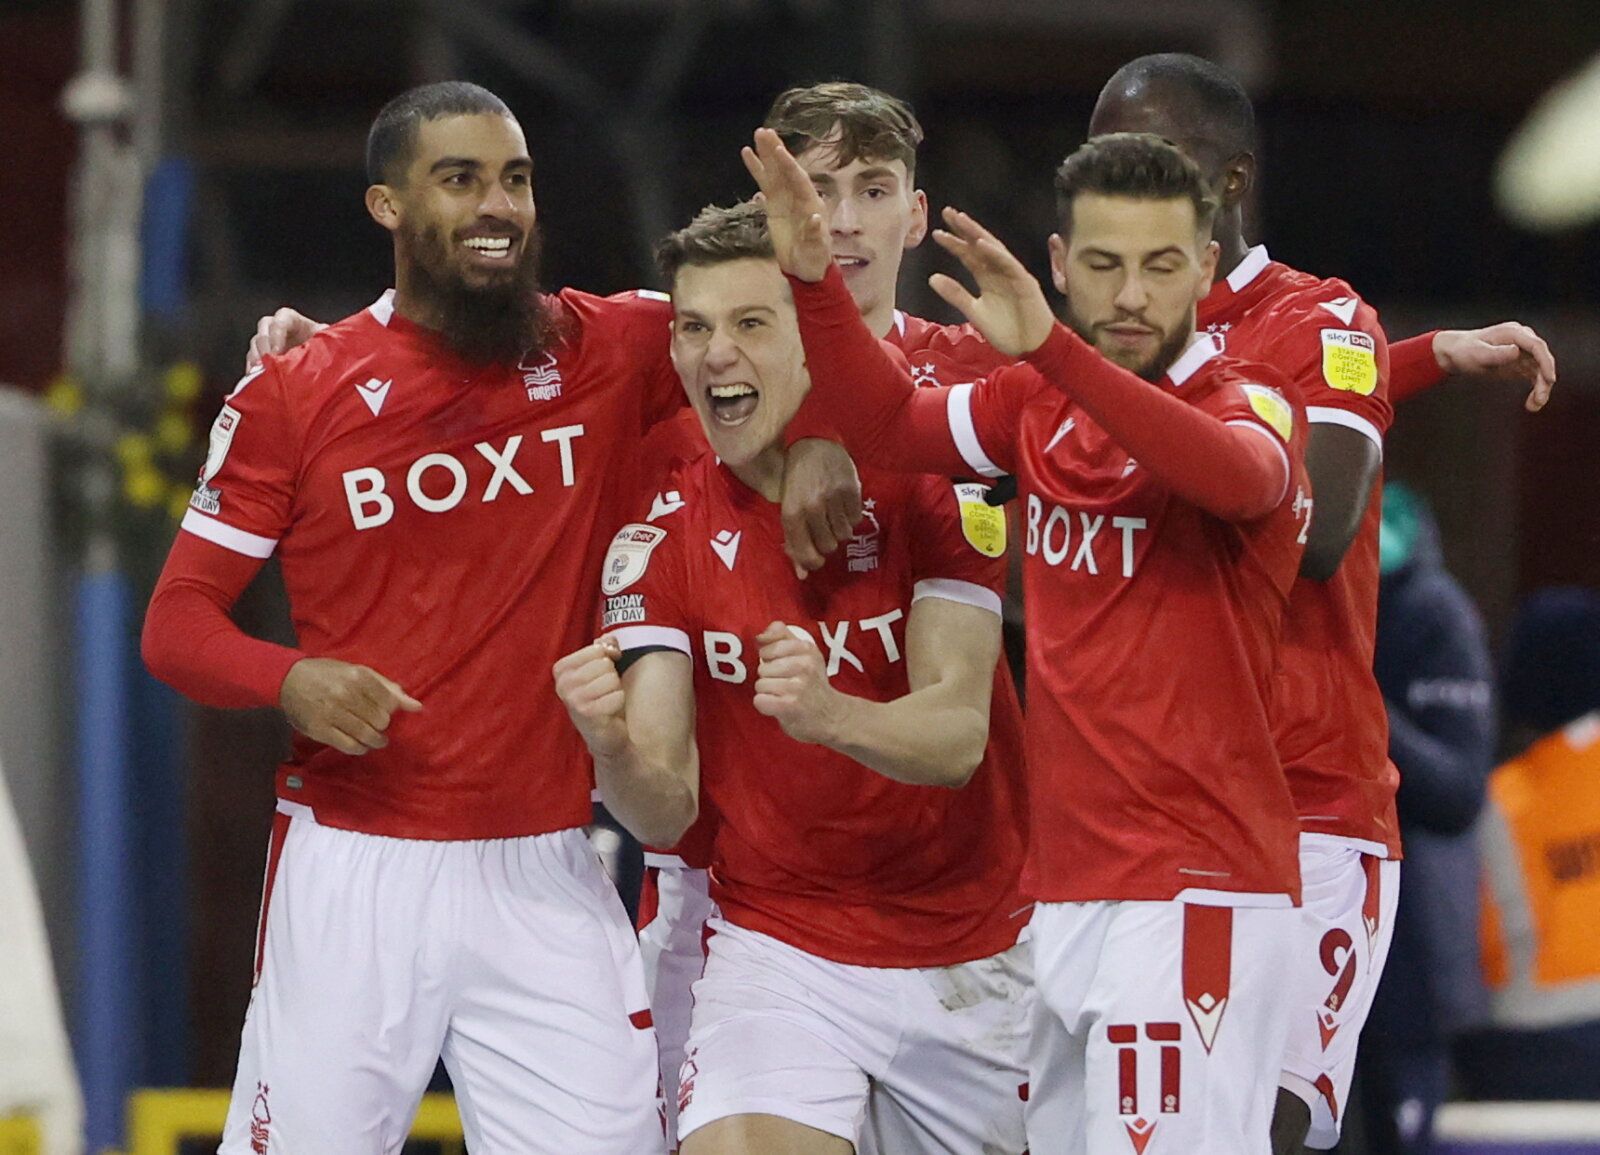 Soccer Football - Championship -  Nottingham Forest v Barnsley - City Ground, Nottingham, Britain - January 25, 2022  Nottingham Forest's Ryan Yates celebrates scoring their first goal with teammates   Action Images/Molly Darlington    EDITORIAL USE ONLY. No use with unauthorized audio, video, data, fixture lists, club/league logos or 